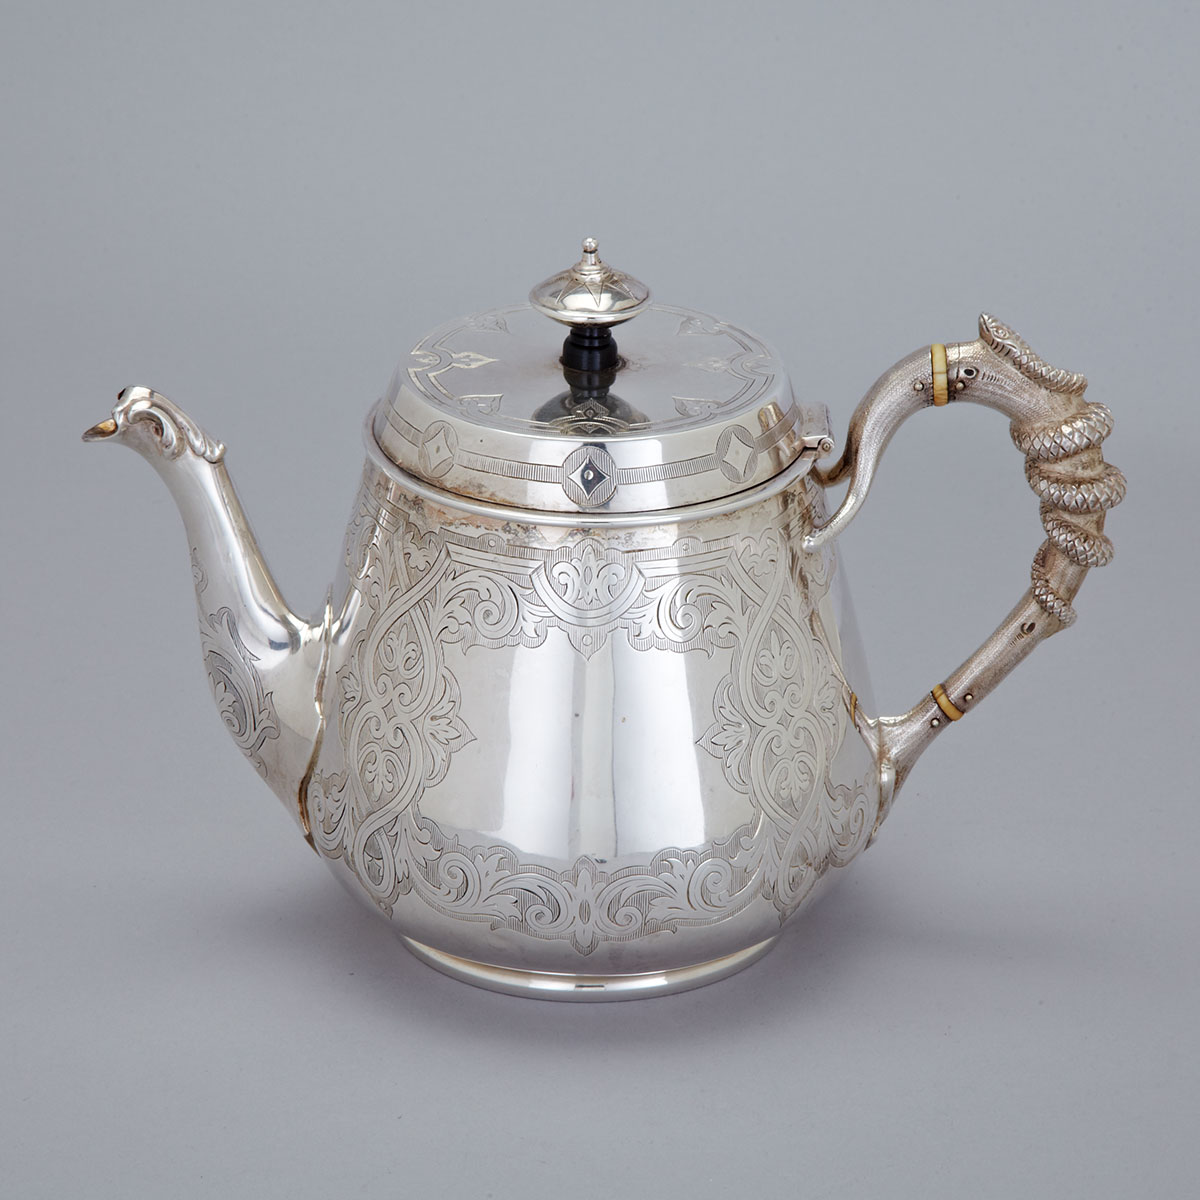 Victorian Silver Teapot, Henry Holland, London, 1874